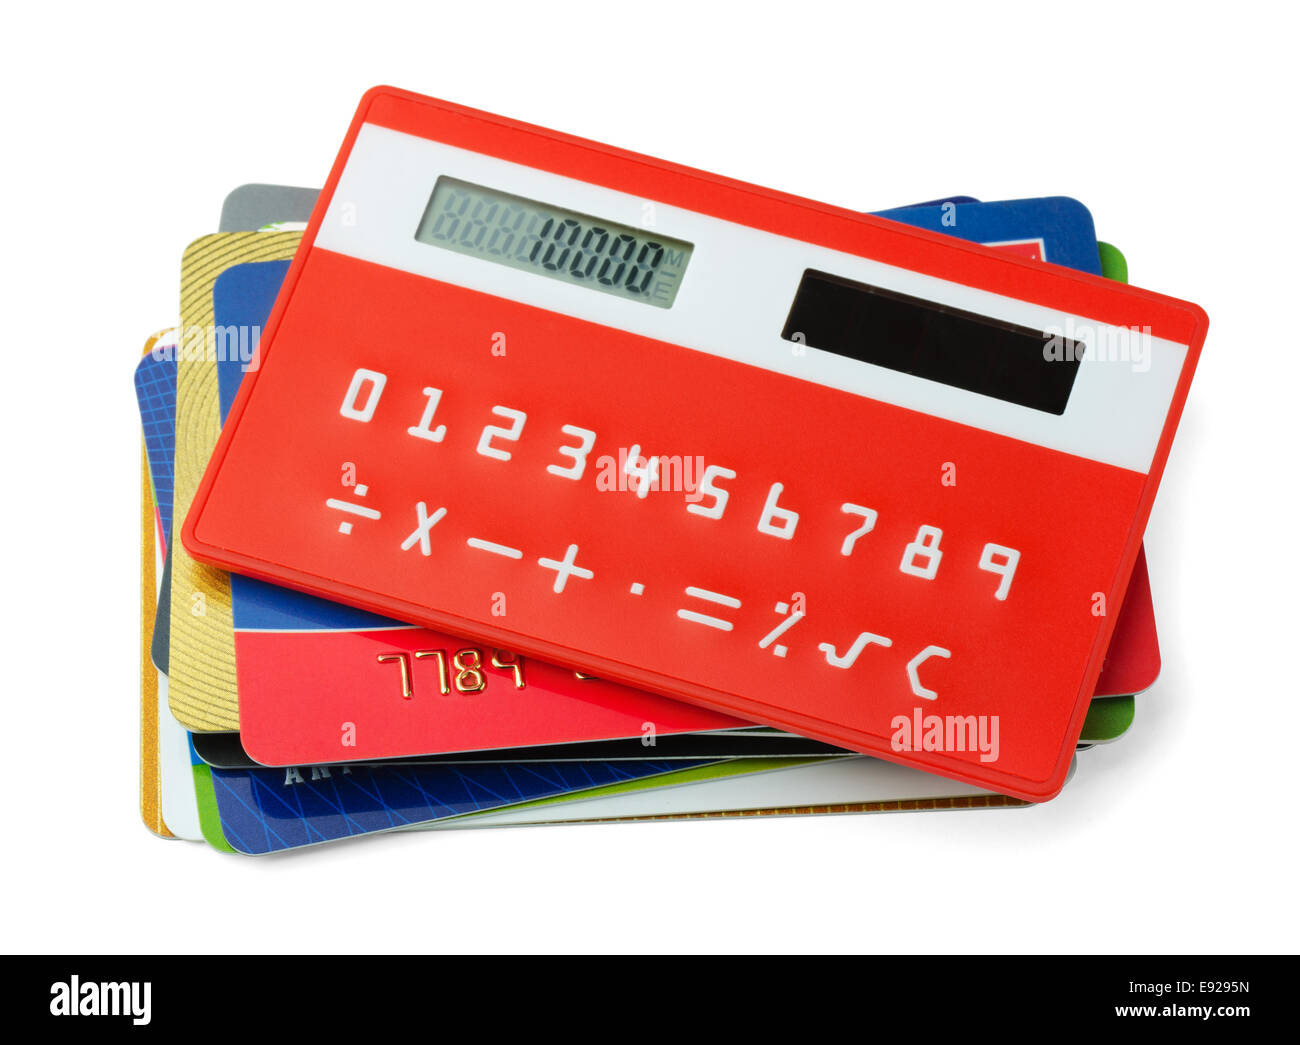 Calculator and credit cards Stock Photo